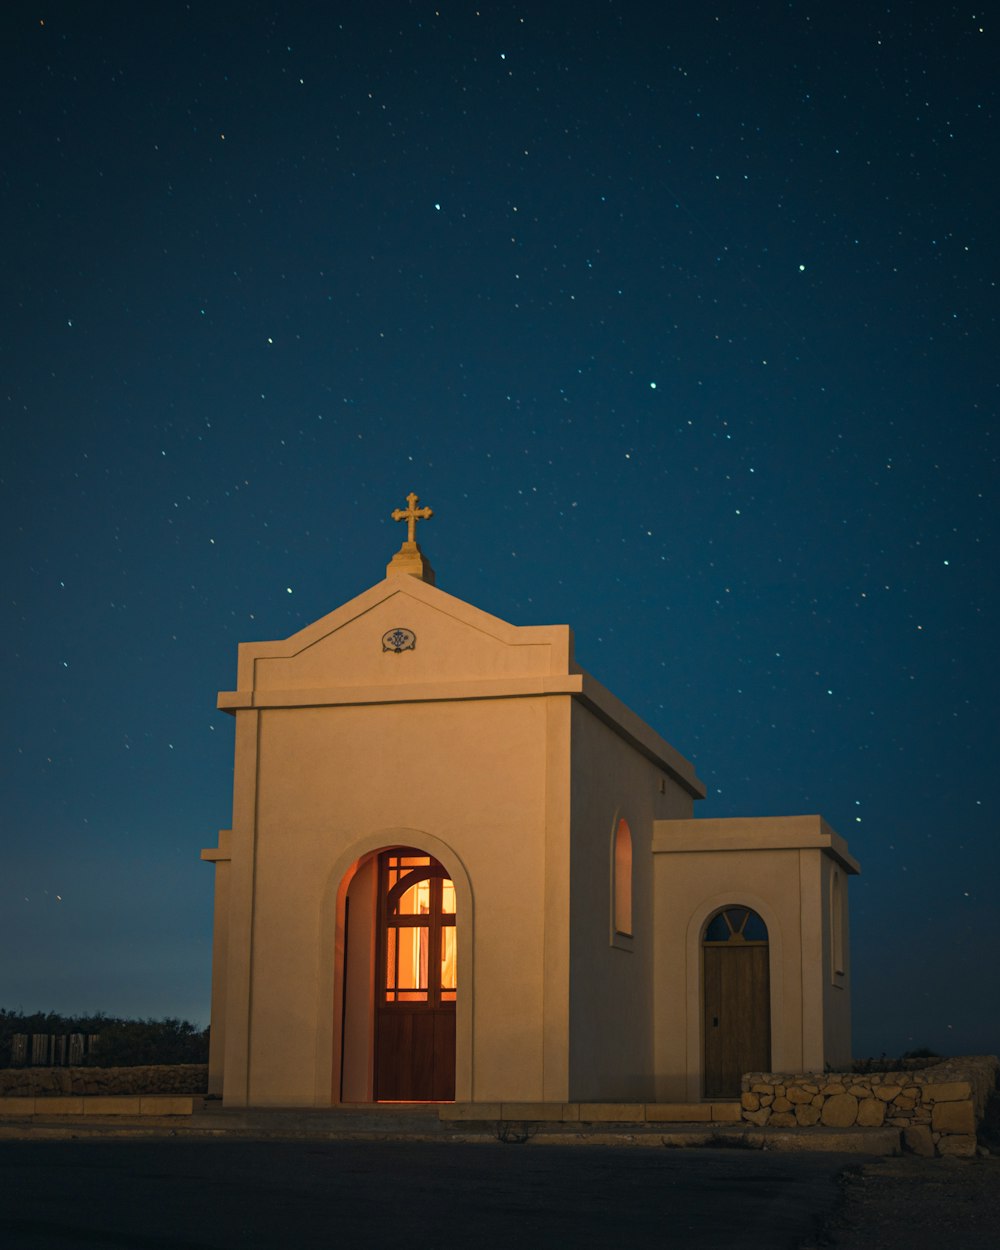 white concrete church under blue sky during night time